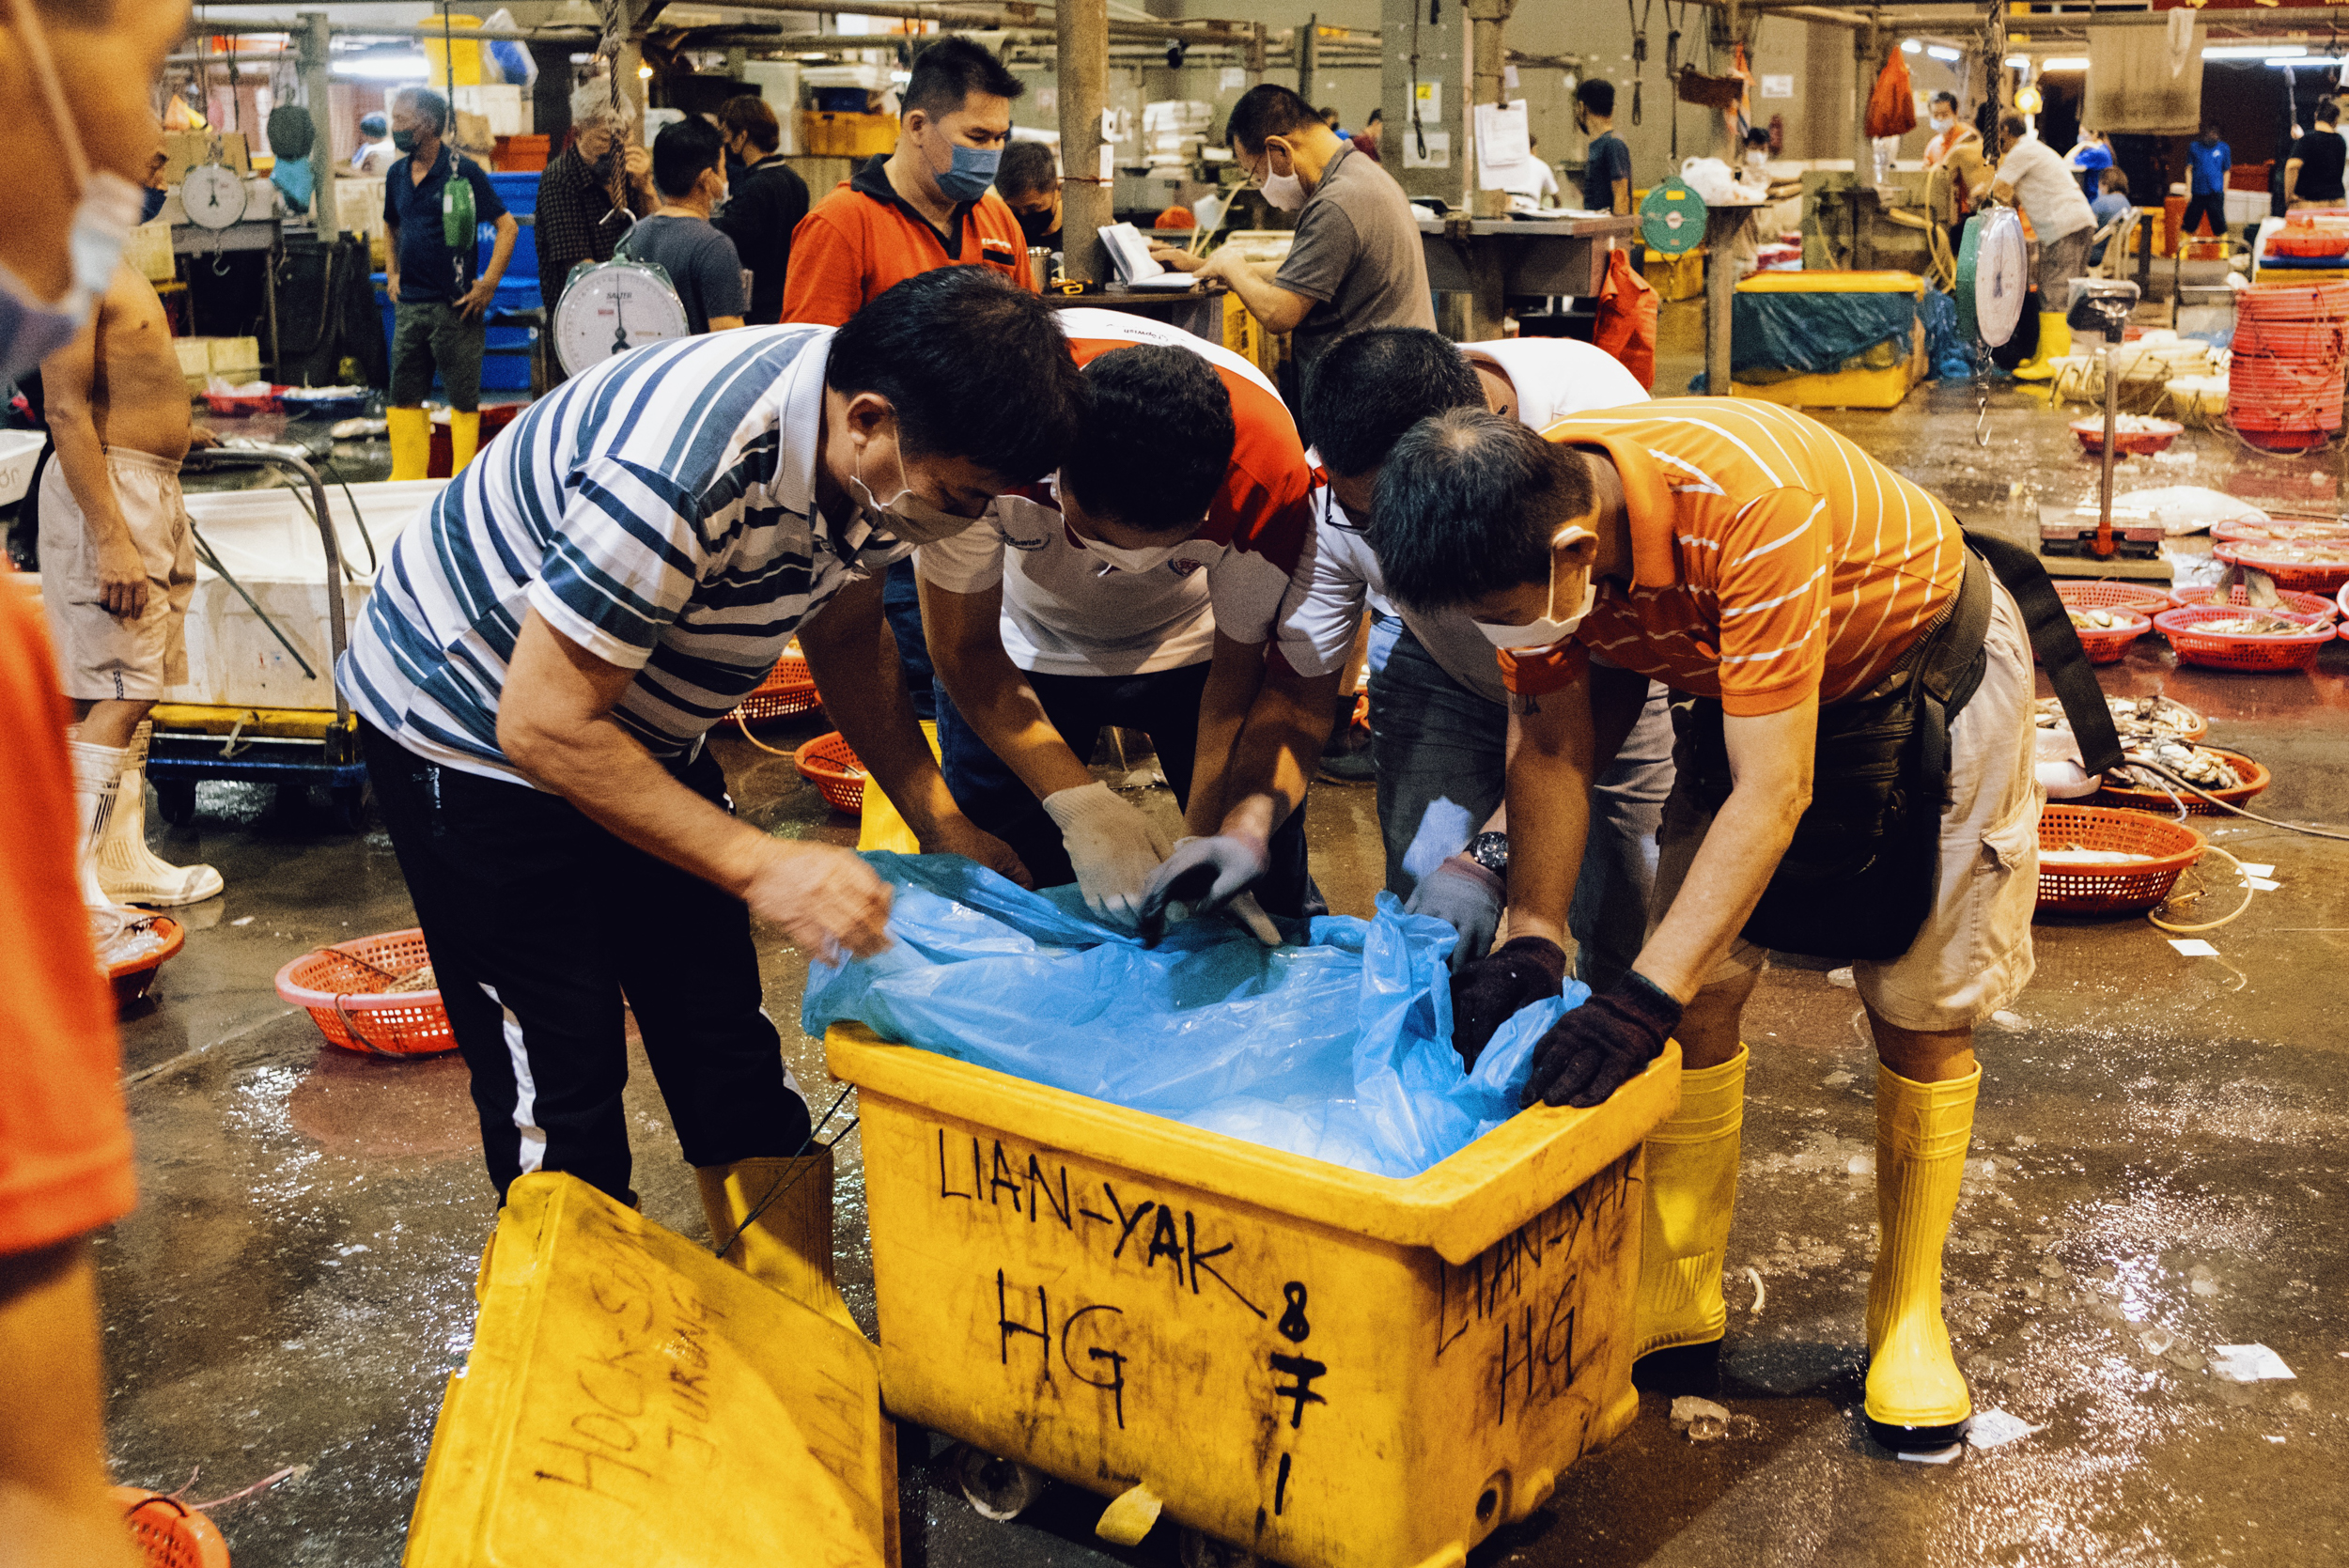 Customers and workers alike peer into the tubs of fishes.